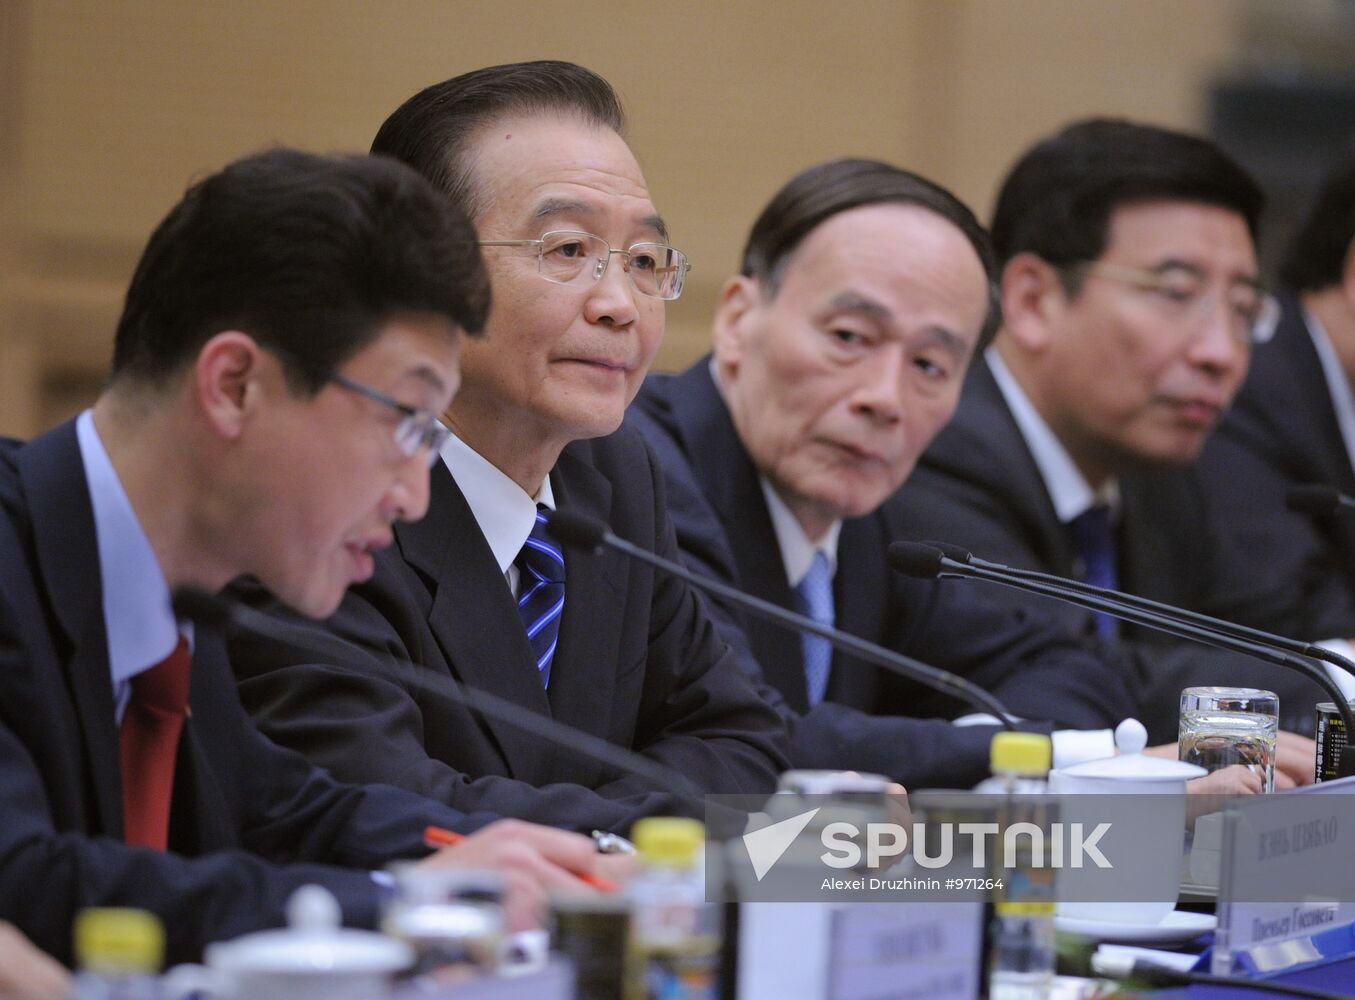 Premier of the State Council of China Wen Jiabao